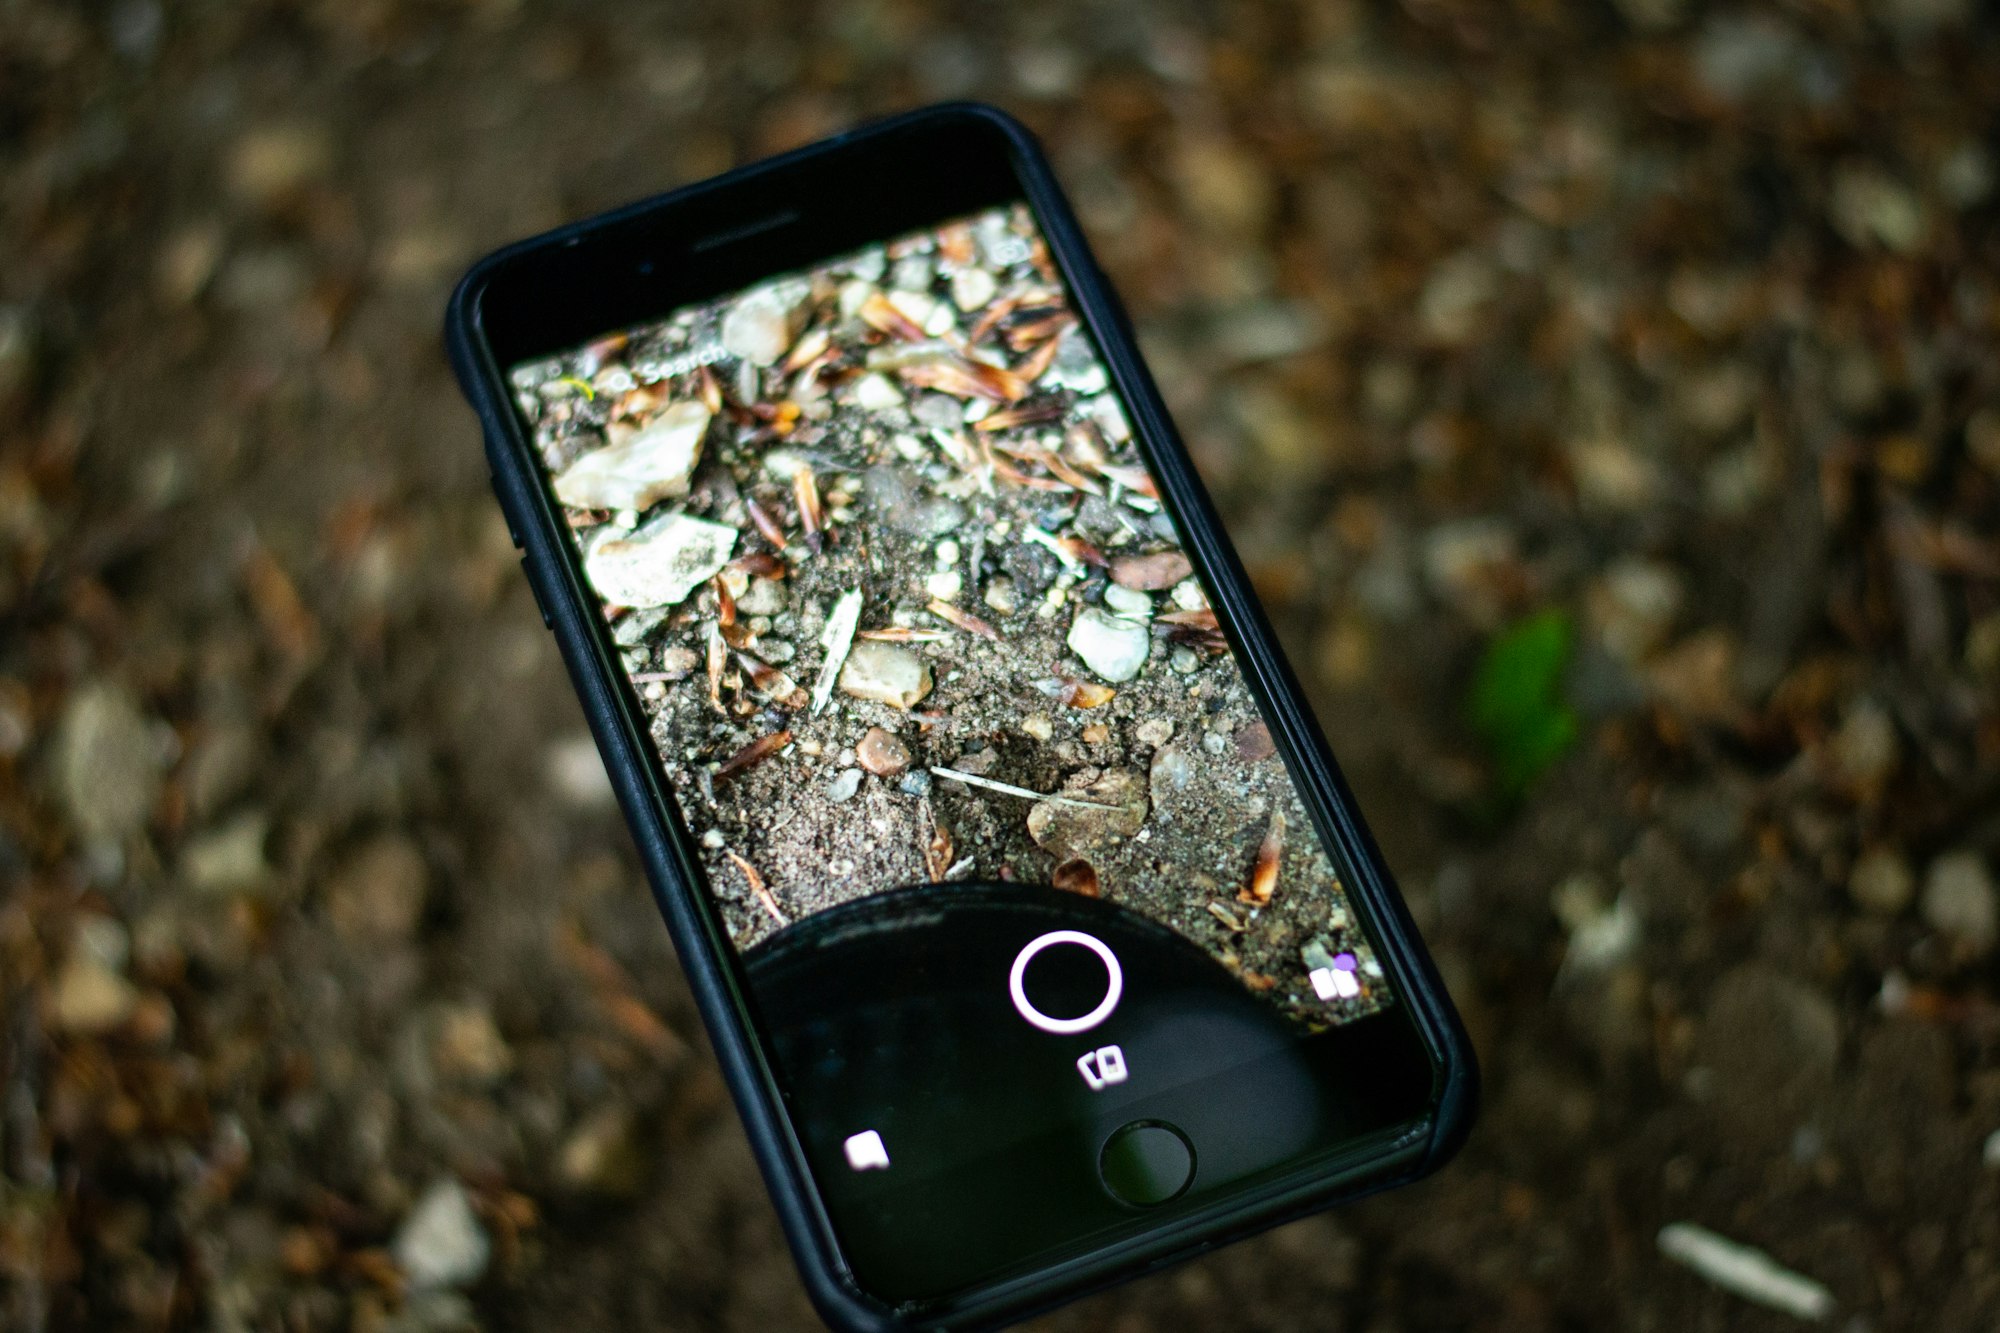 iPhone taking pictures of leaves - Making mediation app for iOS